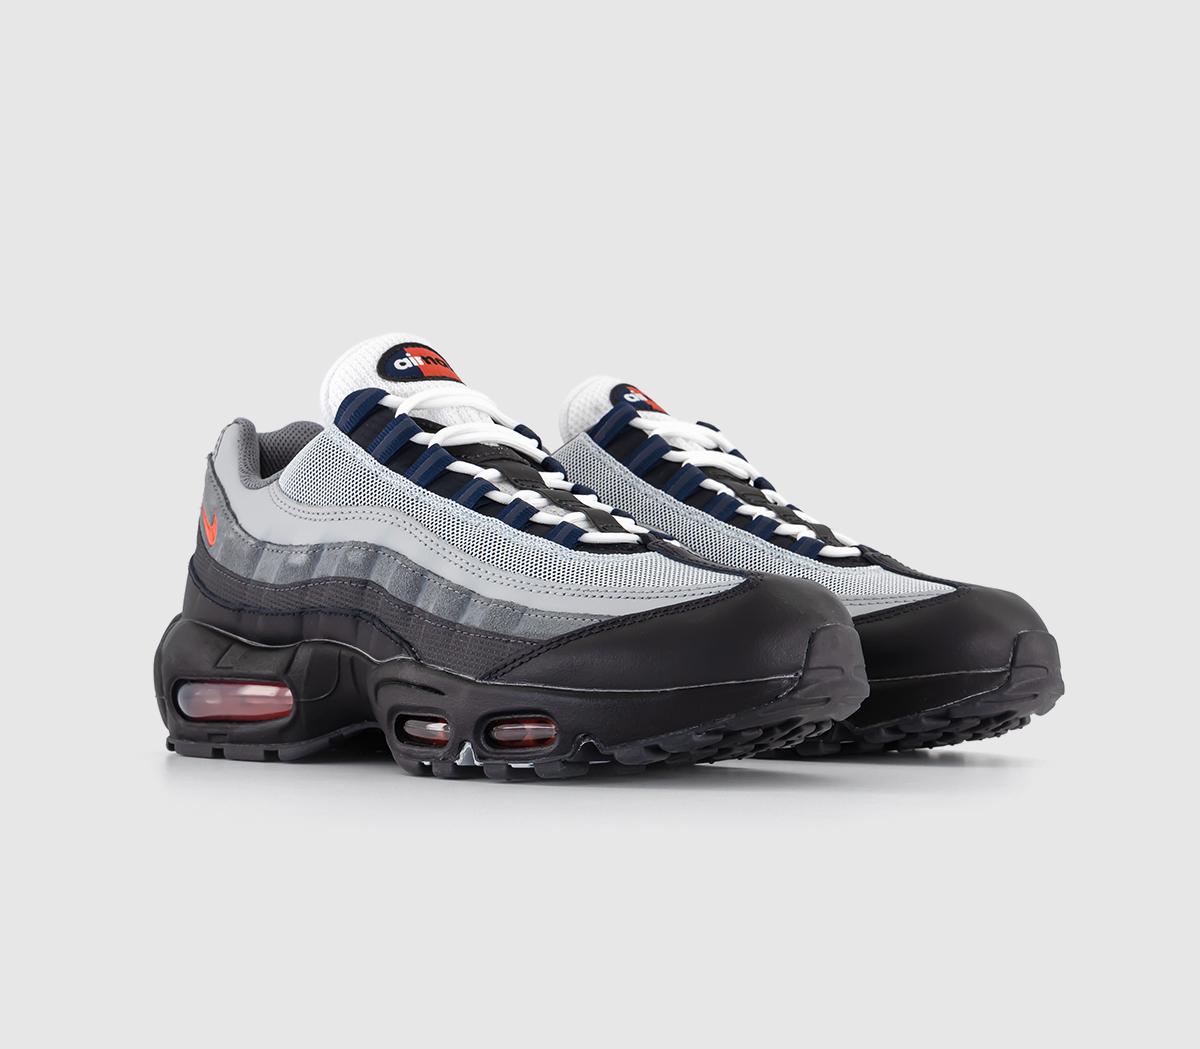 Nike Air Max 95 Trainers Black Track Red Anthracite Smoke Grey, 6